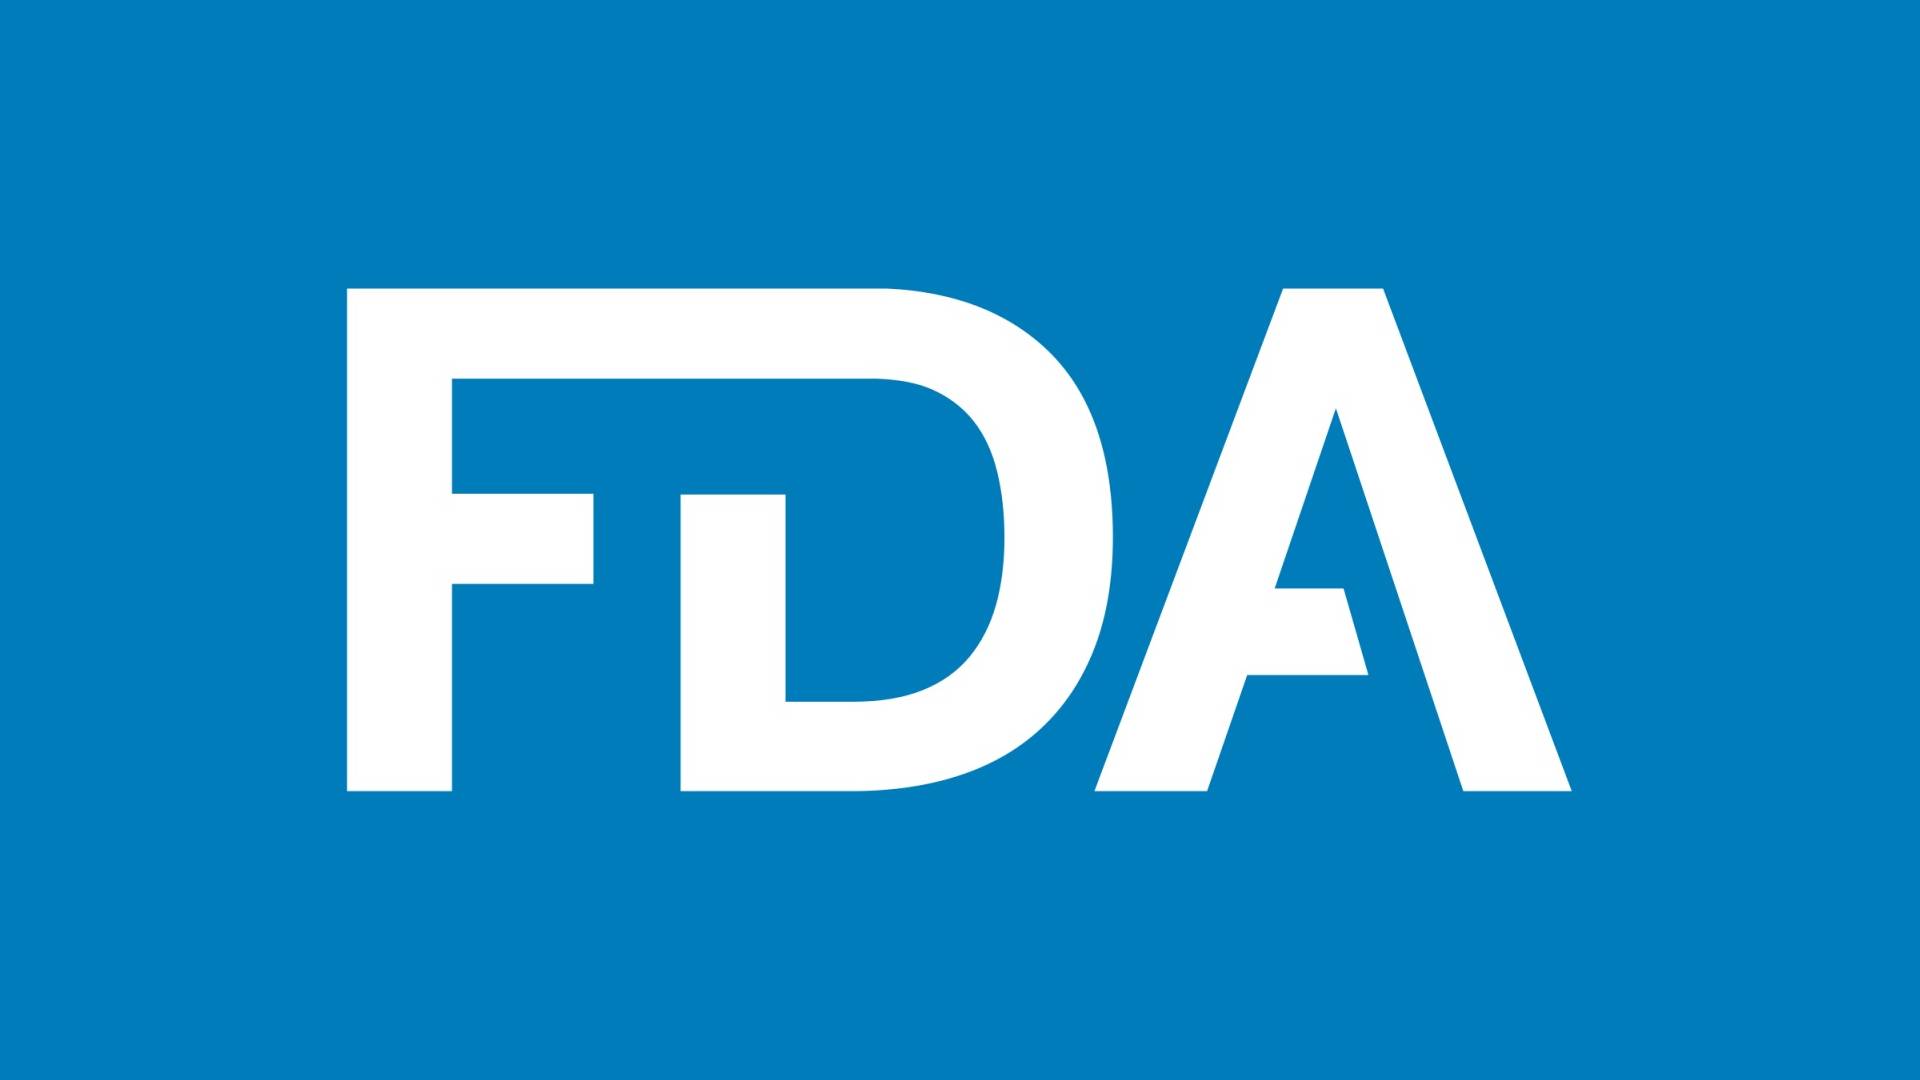 Health News Roundup: US FDA approves ImmunityBio's bladder cancer therapy; UnitedHealth says hackers possibly stole large number of Americans' data and more